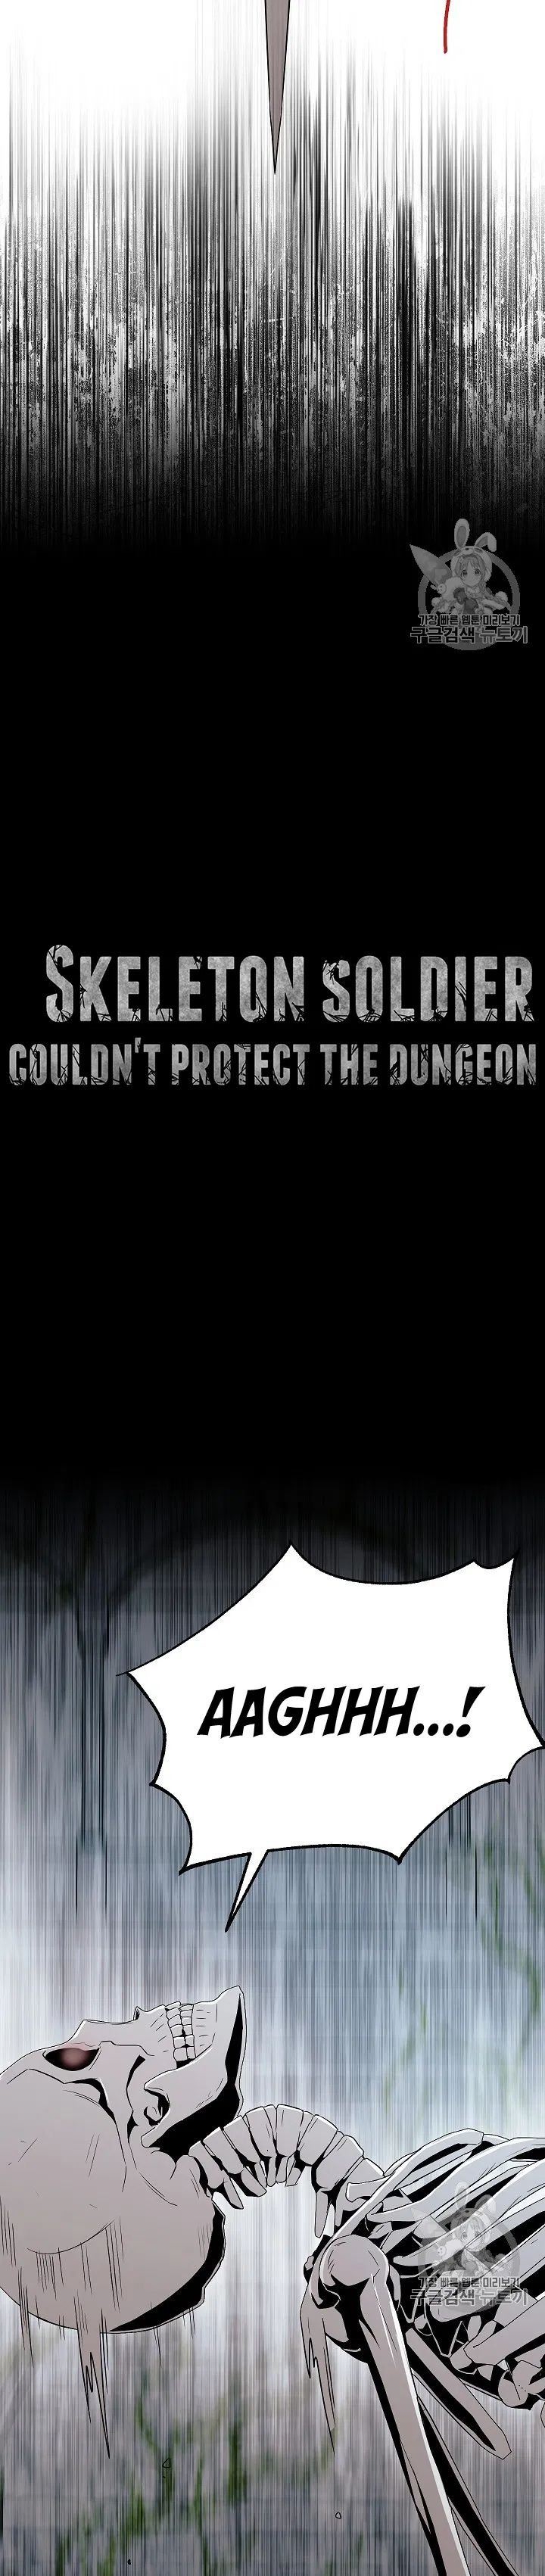 skeleton_soldier_couldnt_protect_the_dungeon_103_3